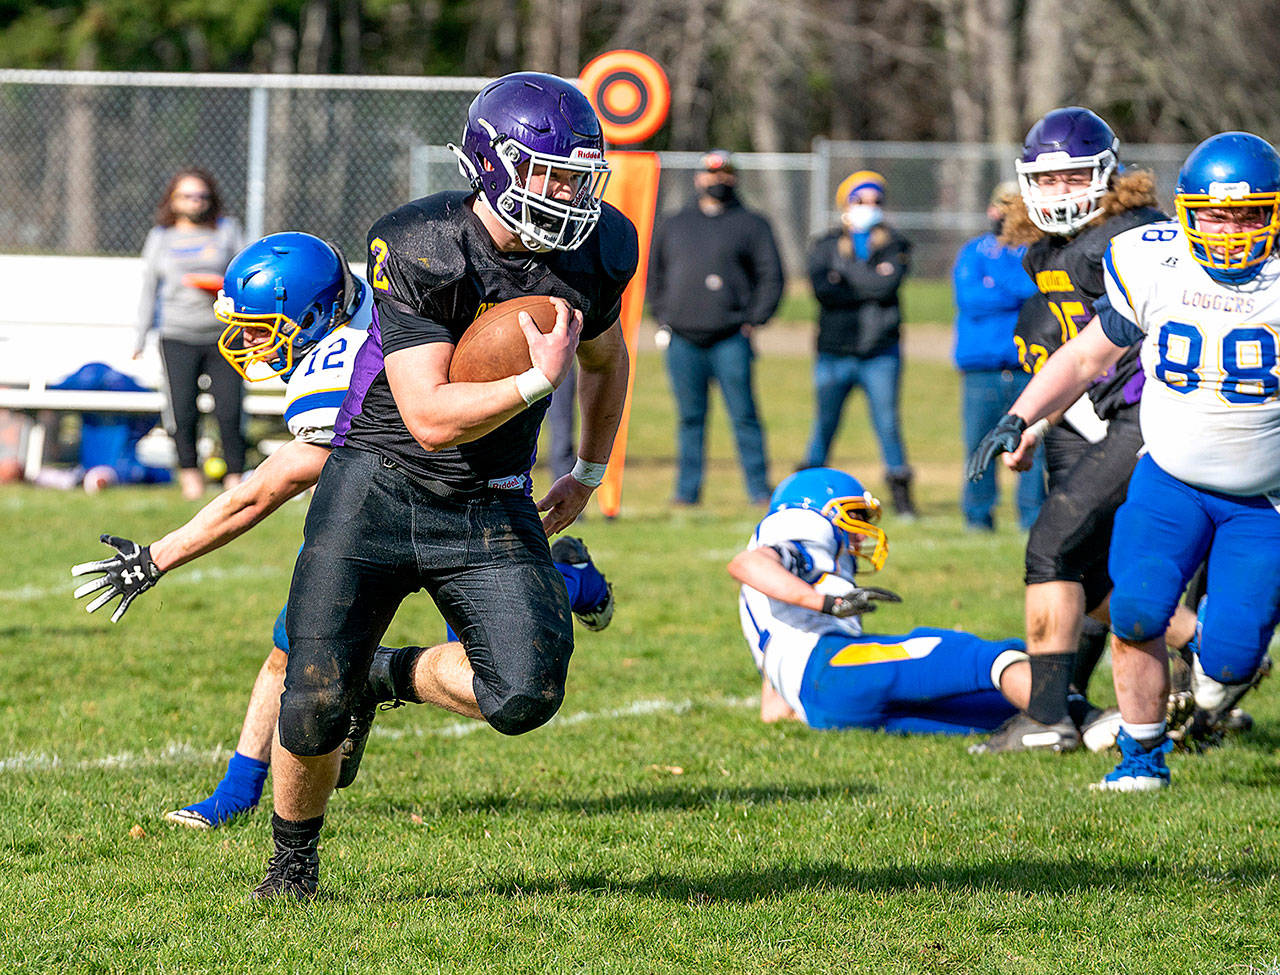 Quilcene’s Bishop Budnek Scampers for a 55 yard touchdown run during a Saturday home game against the Crescent Loggers. (Steve Mullensky/for Peninsula Daily News)